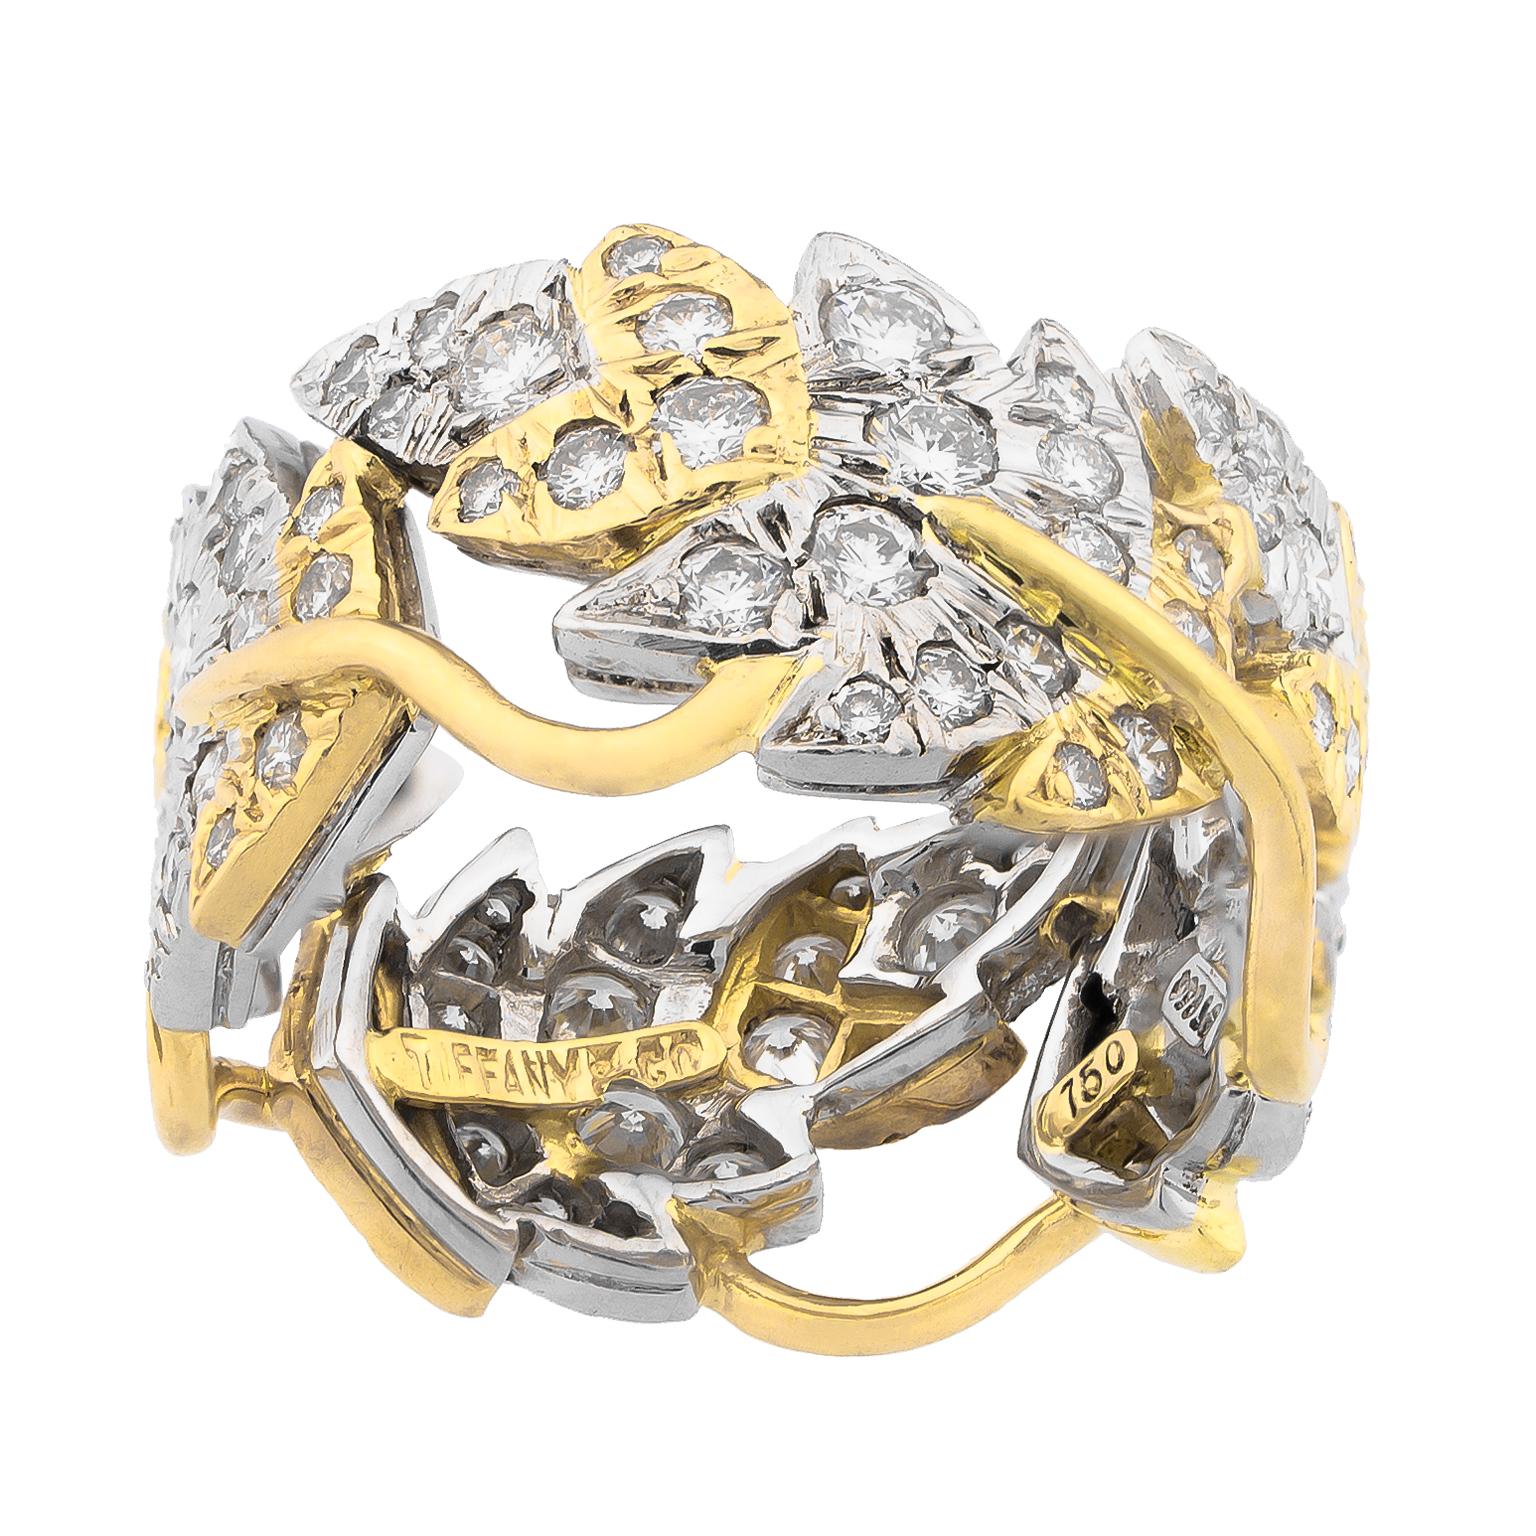 Tiffany & Co. ring, in gold and platinum with foliate motives set with 1.85 carats in round brilliant cut diamonds, Schlumberger Leaves model.
Size: Swiss 10, French 50, US 5 1/4